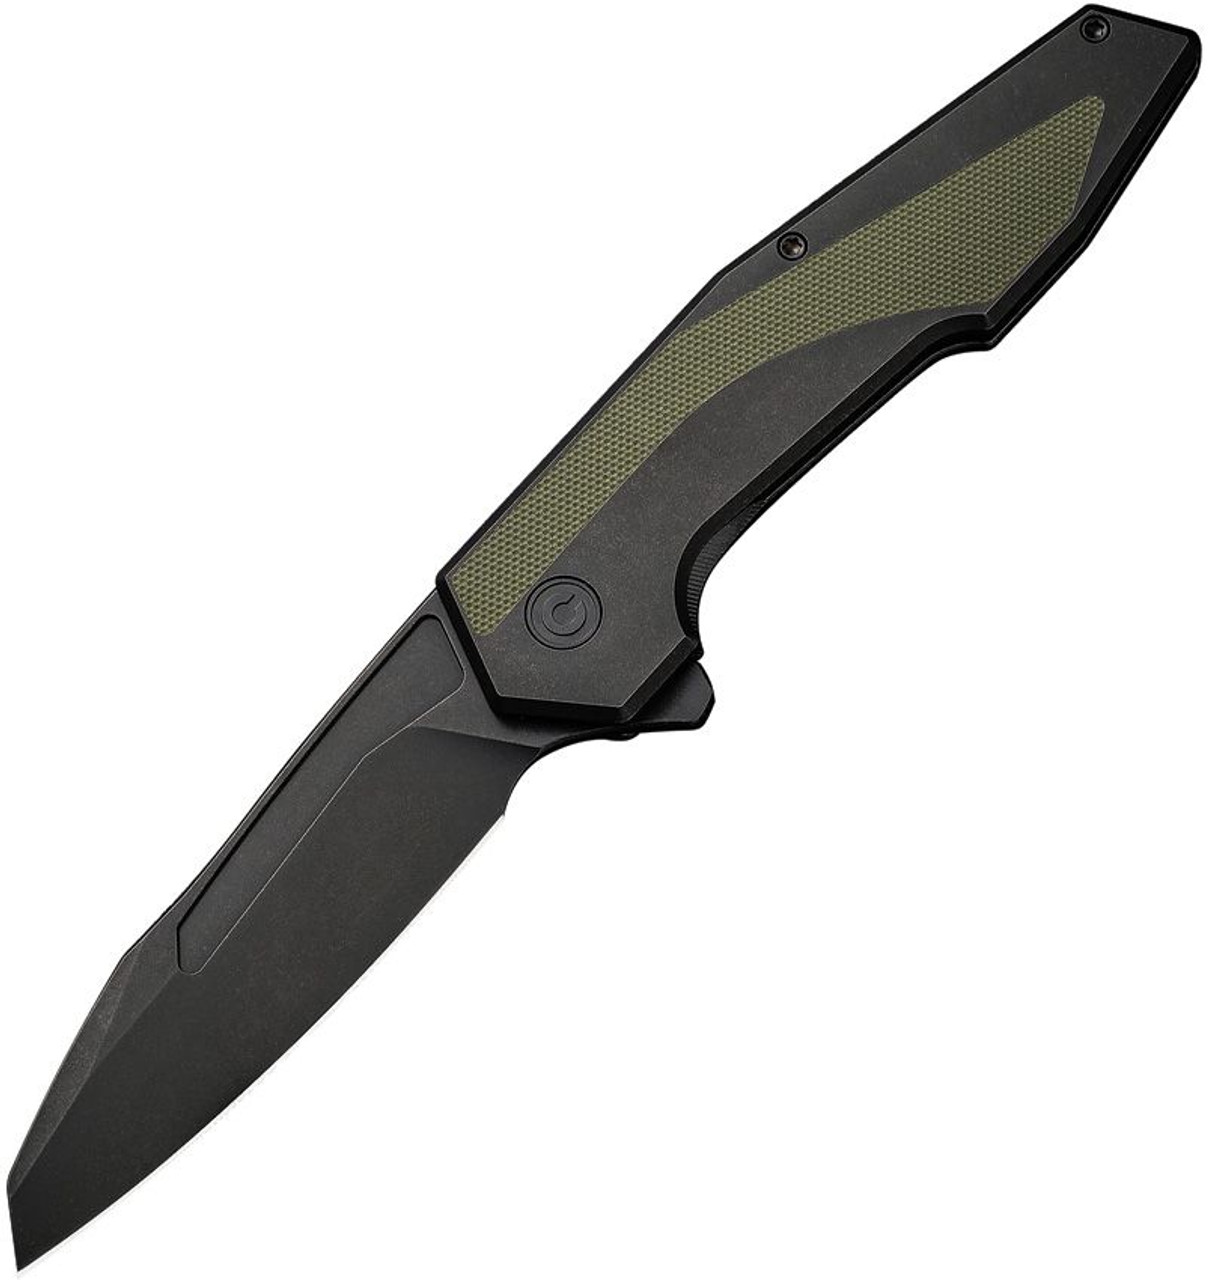 CIVIVI Hypersonic (C220111) 3.7" Black Stonewashed Blade, Black Steel Handle with OD Green Inlay